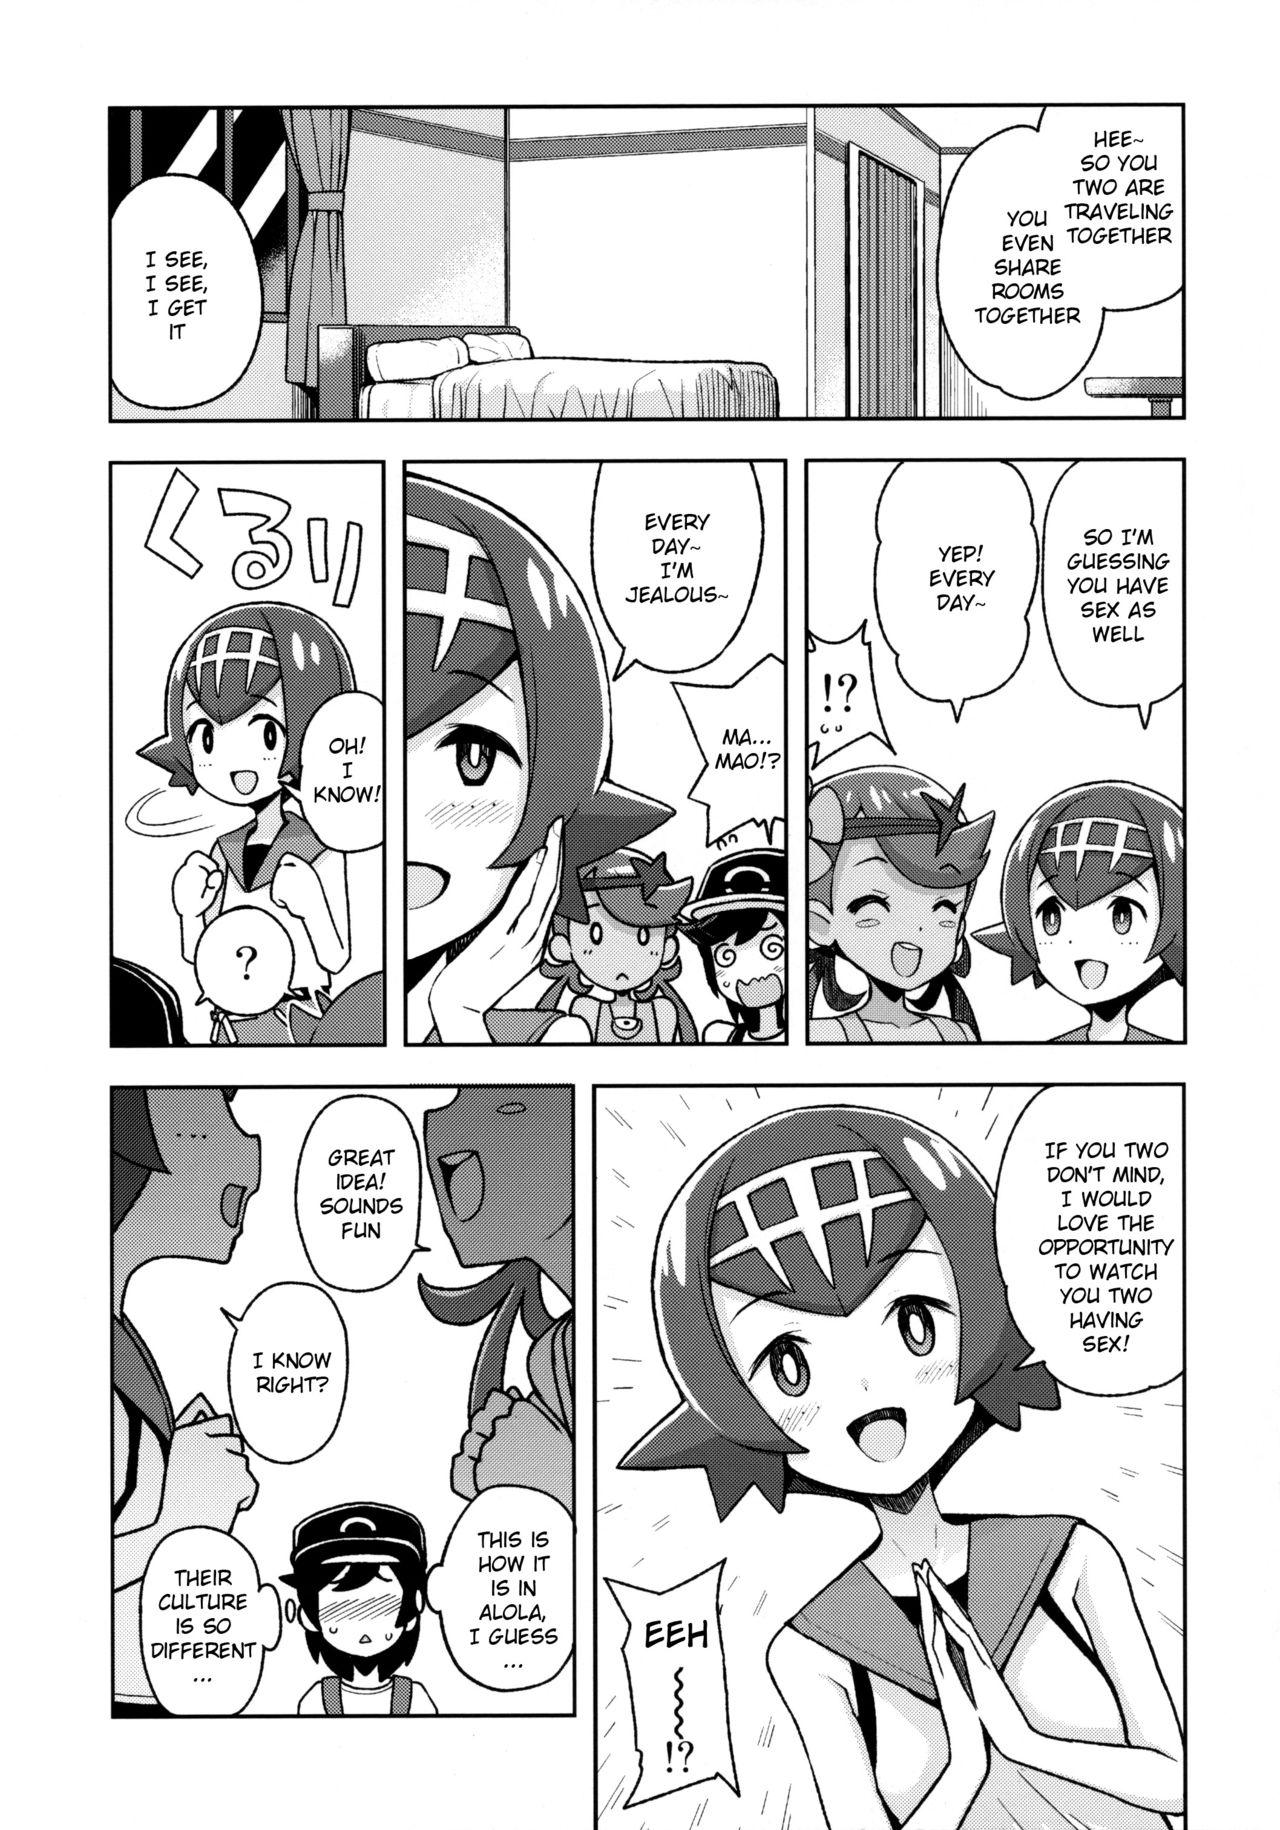 Young Men MAO FRIENDS2 - Pokemon | pocket monsters Punk - Page 4